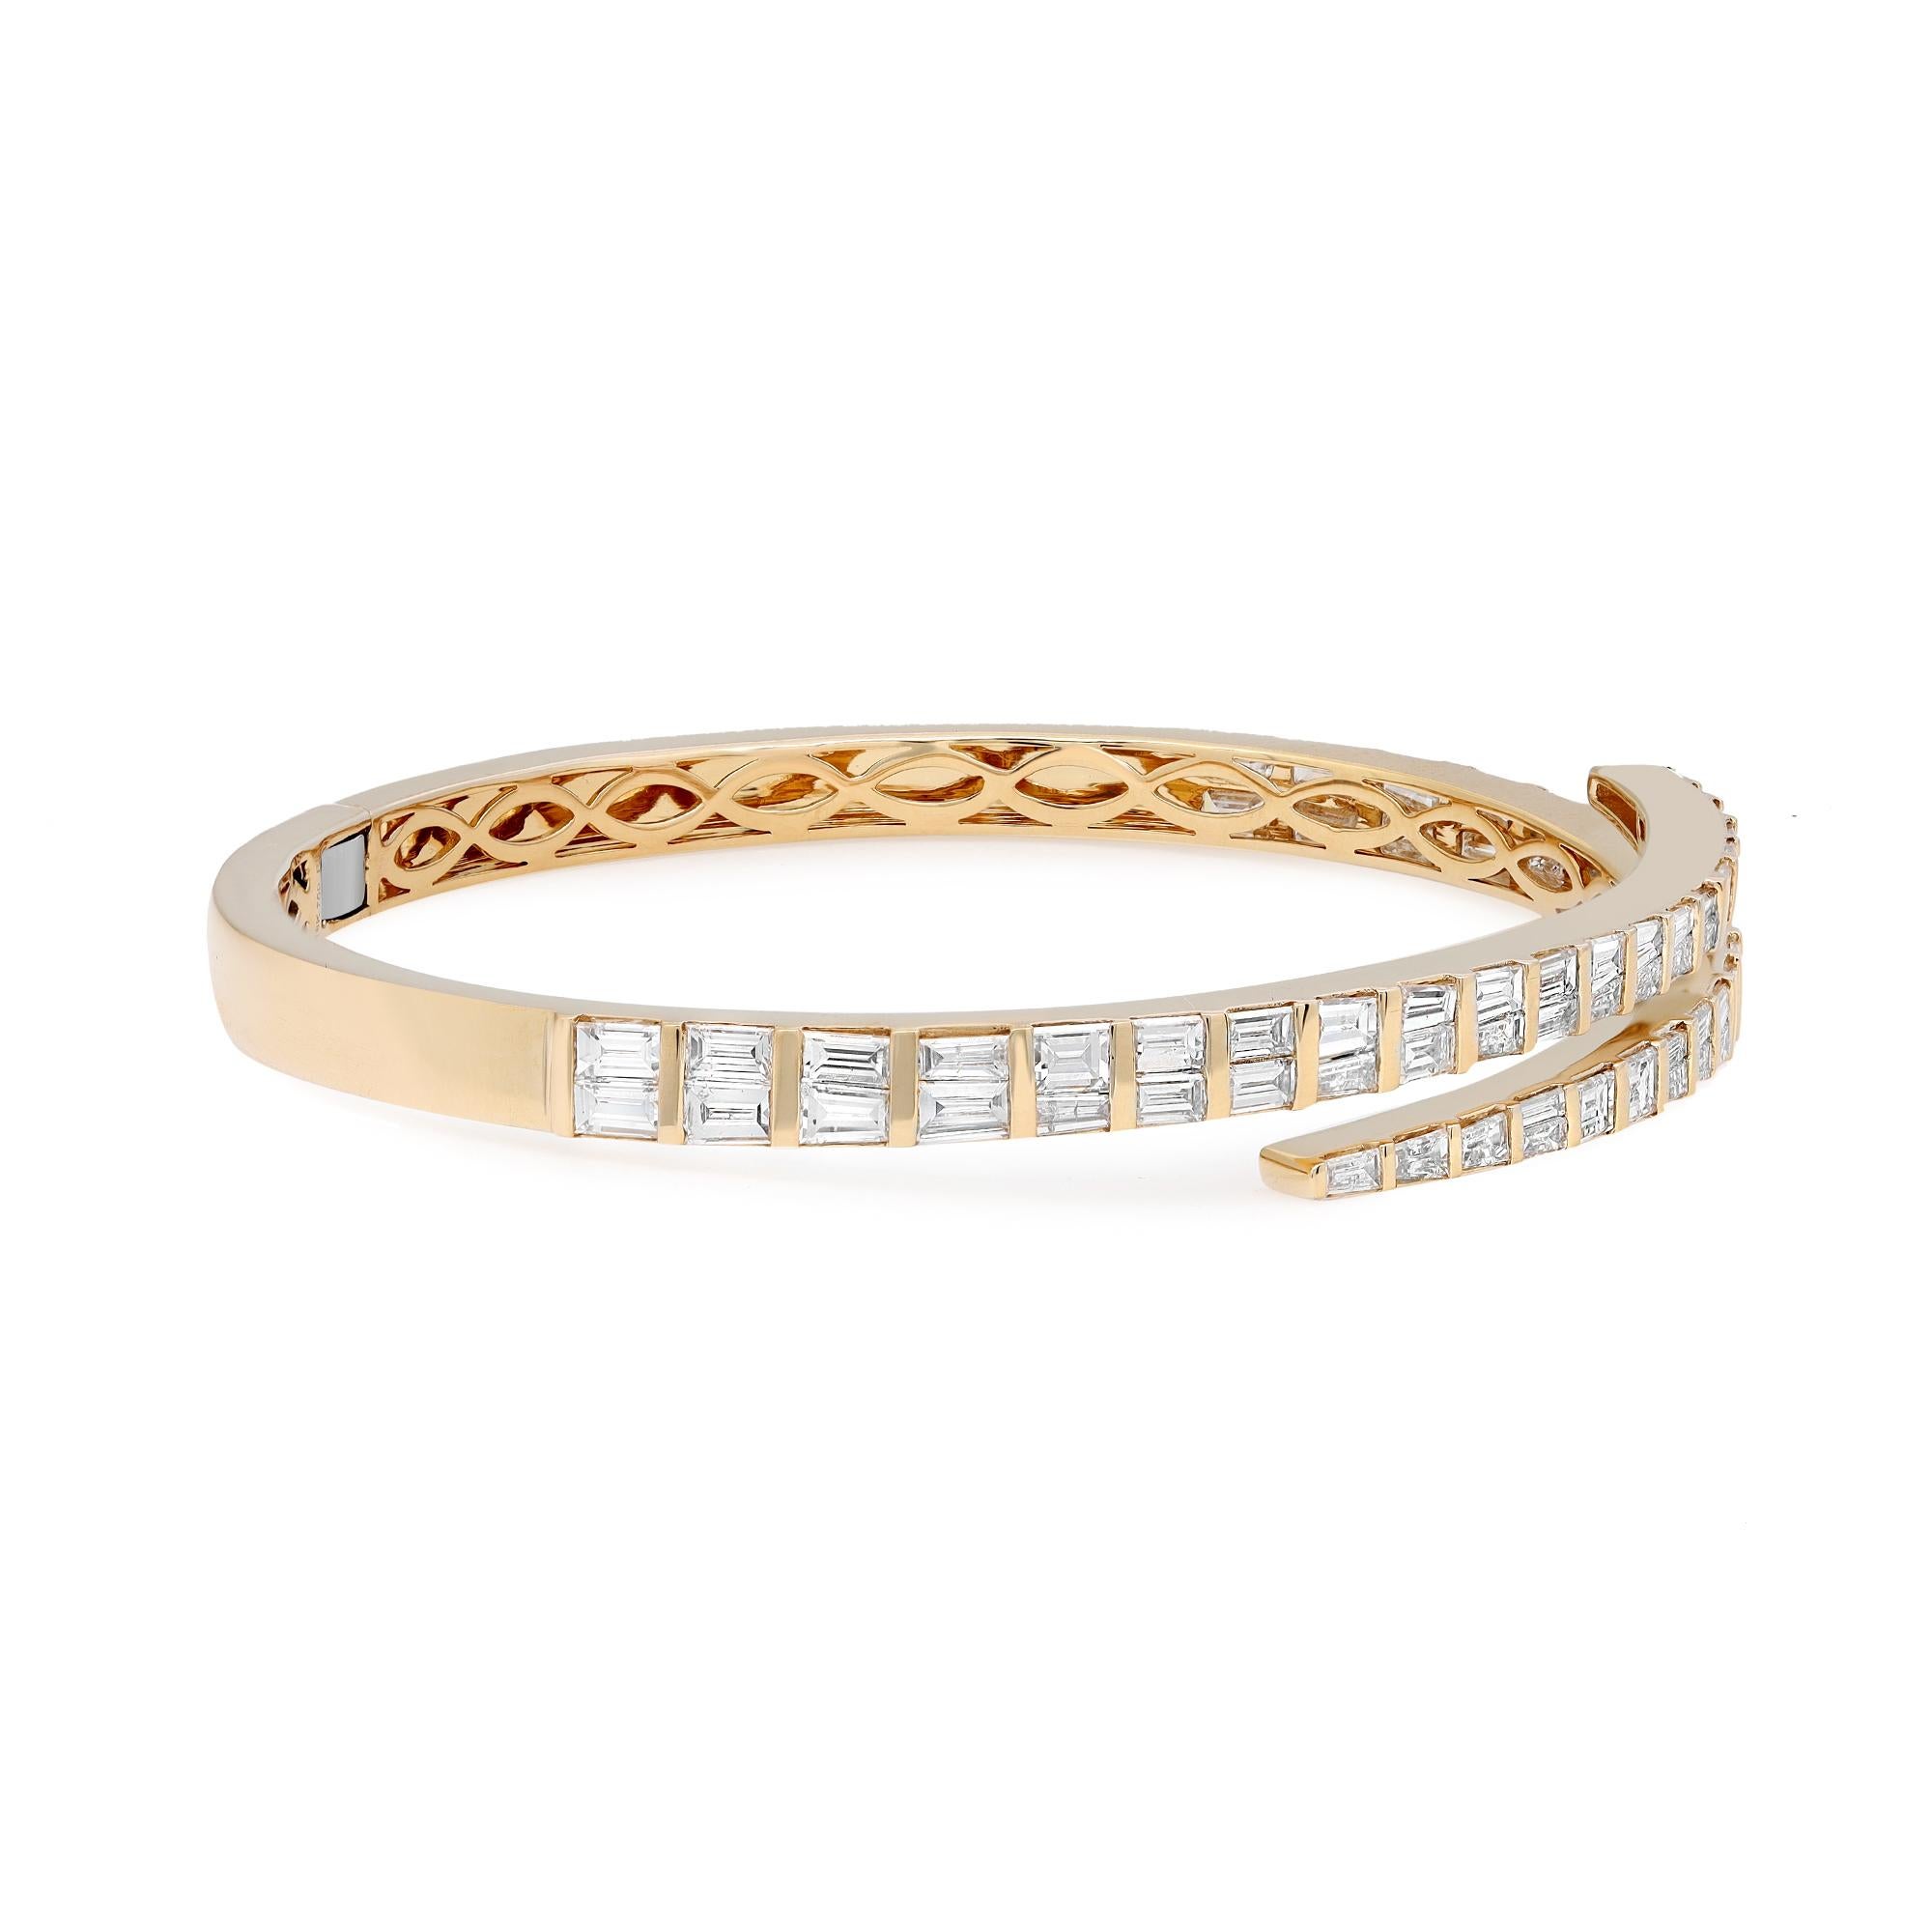 Rachel Koen 4.27Ctw Tapered Baguette Cut Diamond Bangle Bracelet 18K Yellow Gold In New Condition For Sale In New York, NY